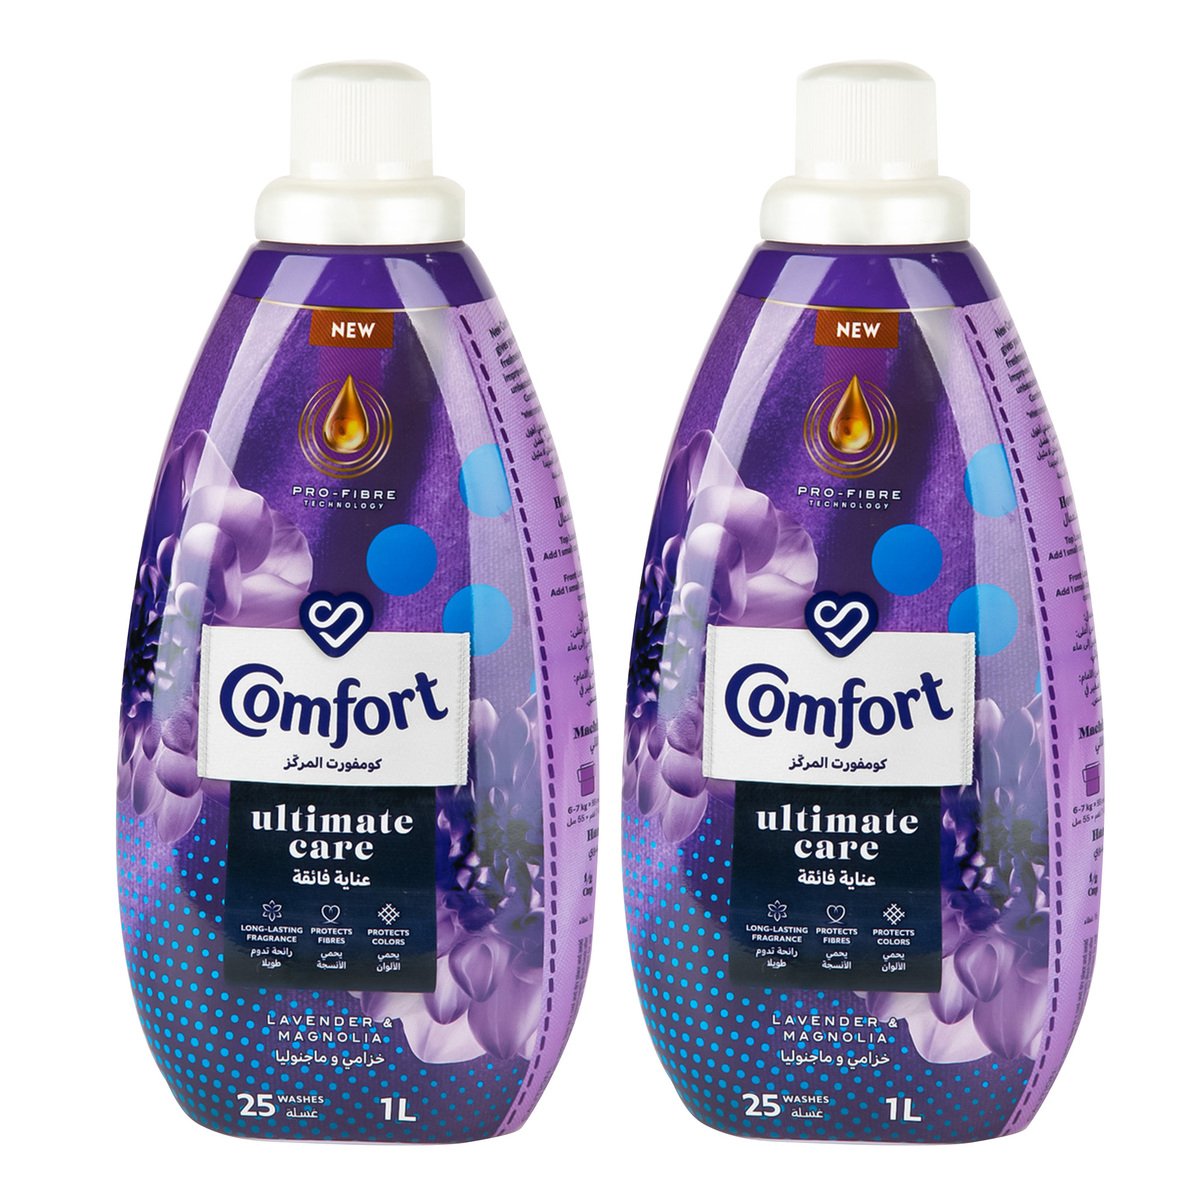 Comfort Ultimate Care Concentrated Fabric Softener Lavender & Magnolia 2 x 1Litre